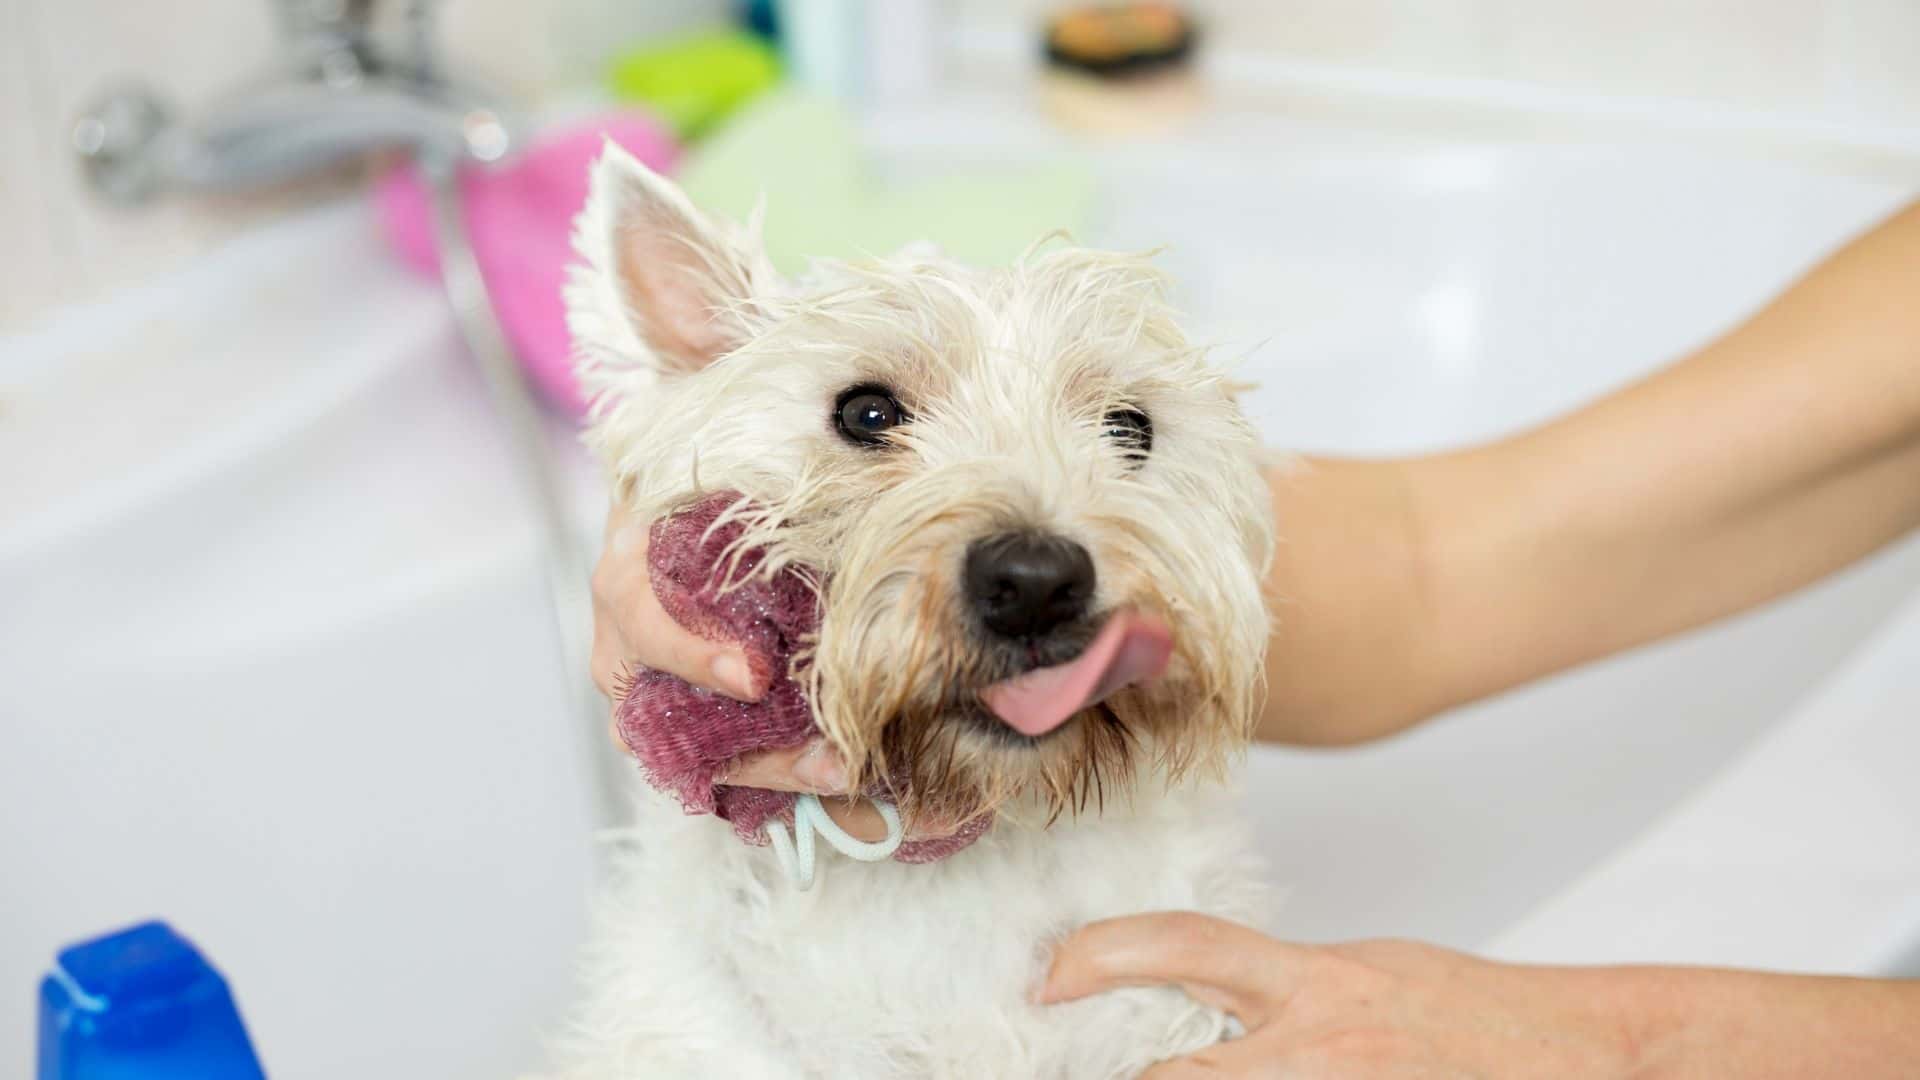 7 Ways of Bathing a Dog Without Dog Shampoo: Guide with Tips